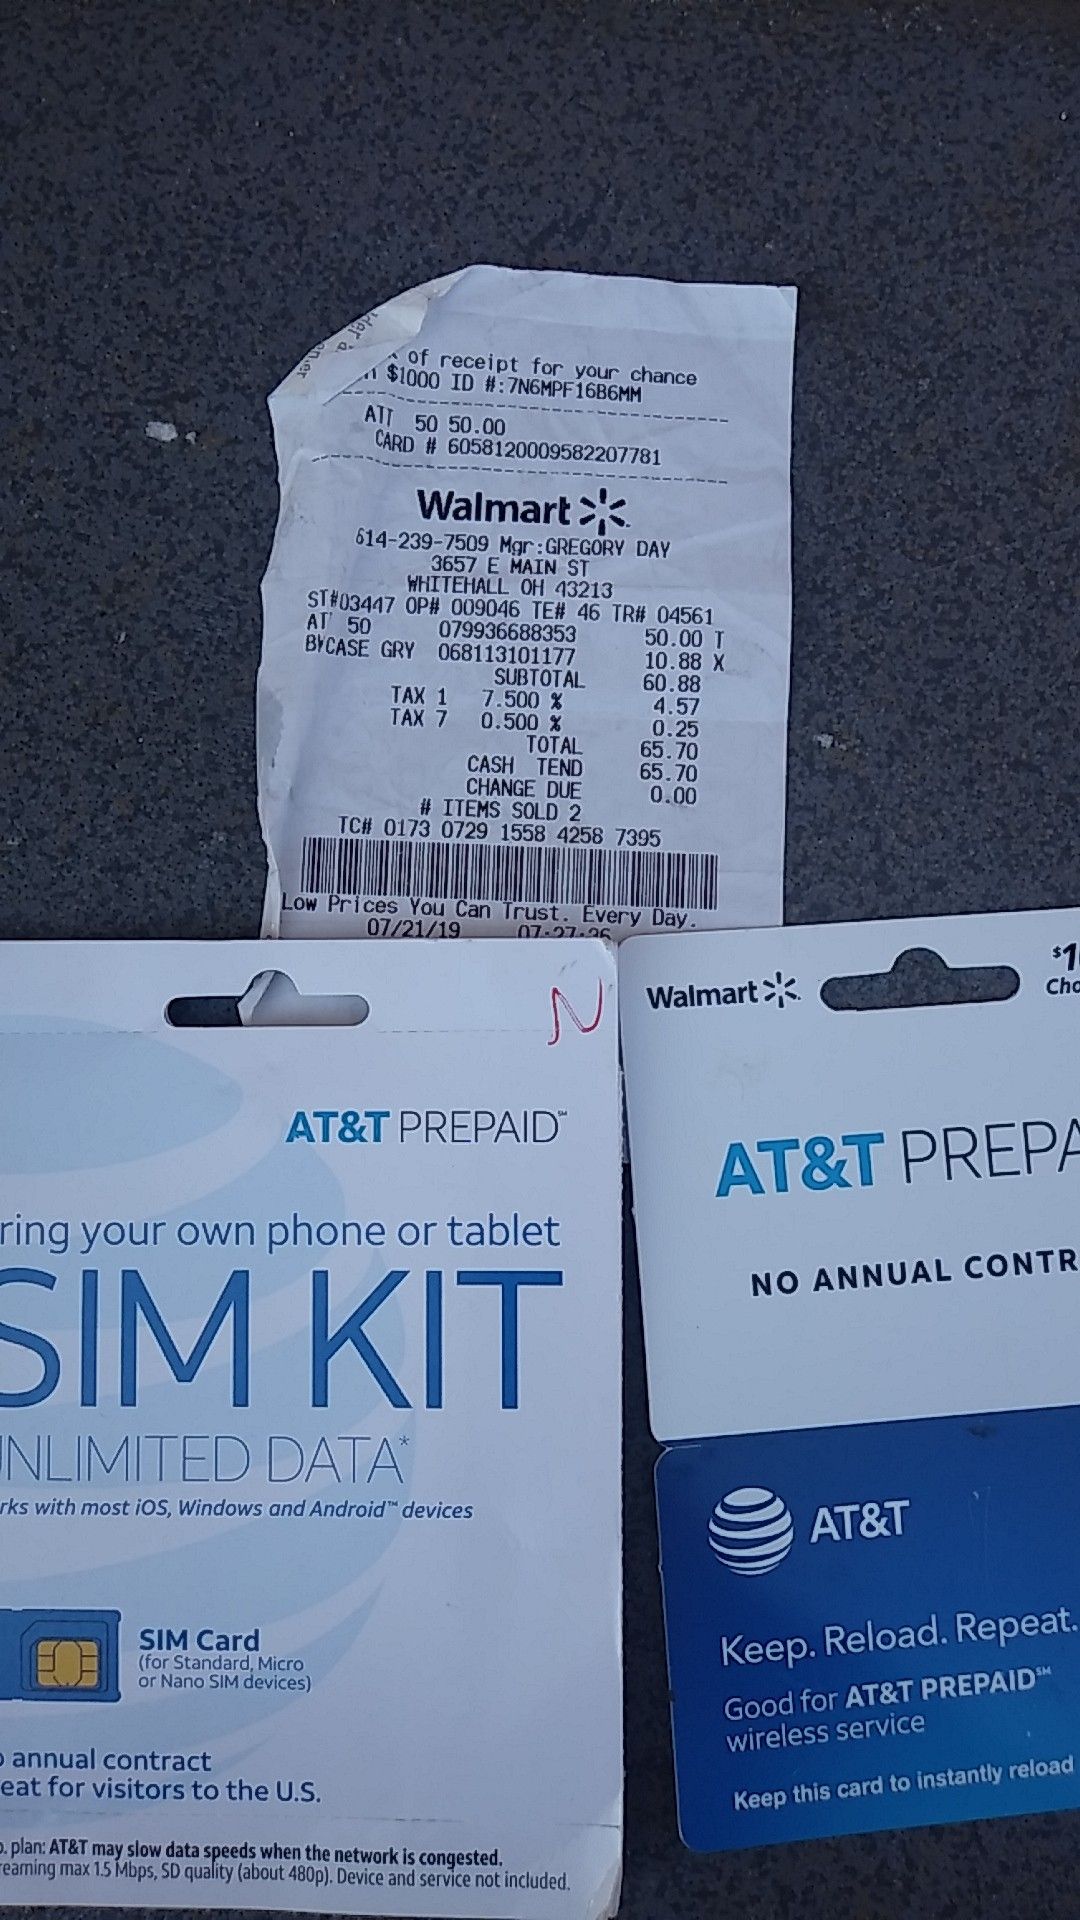 AT&T SIM card kit with reloadable prepaid card to $50 on selling both so 40 bucks